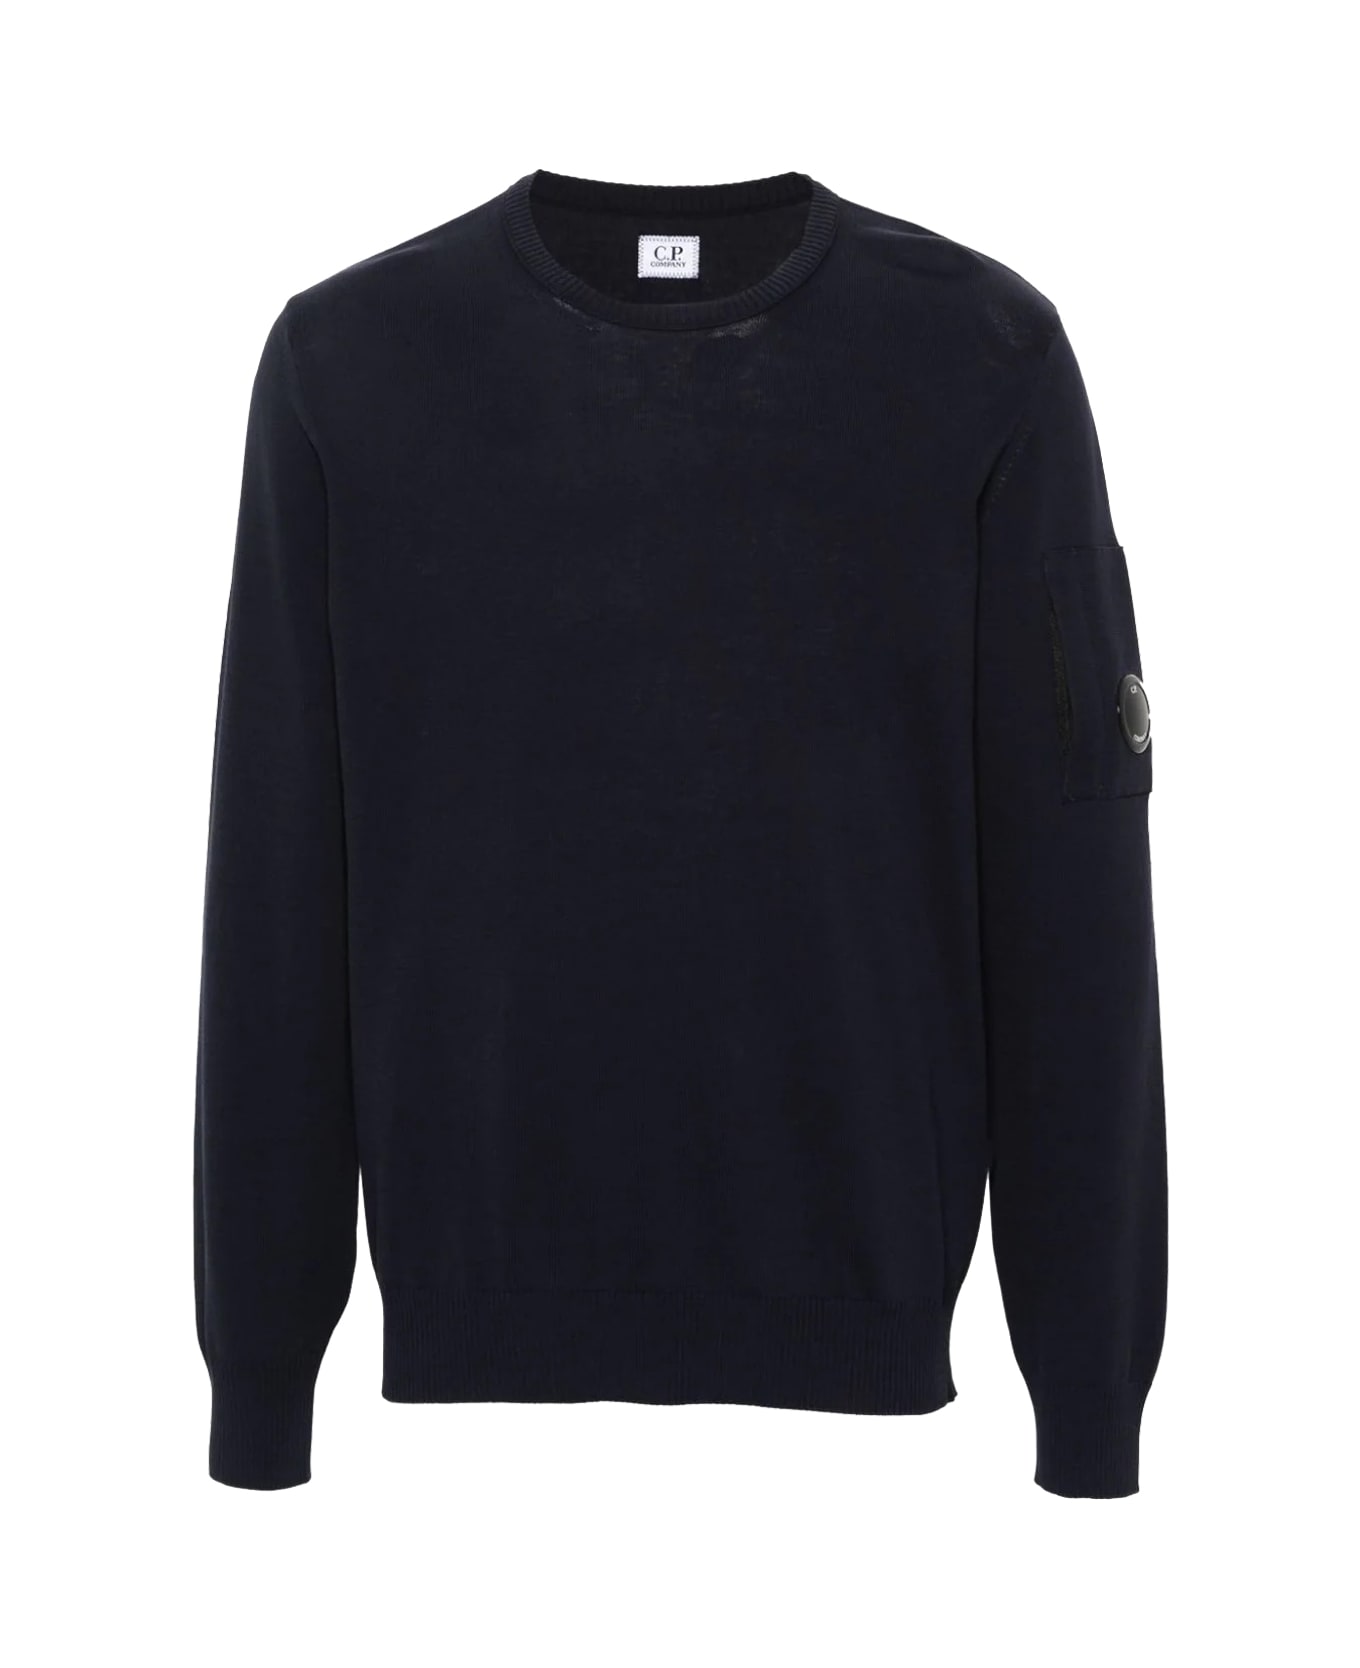 C.P. Company Sweater - Total Eclipse